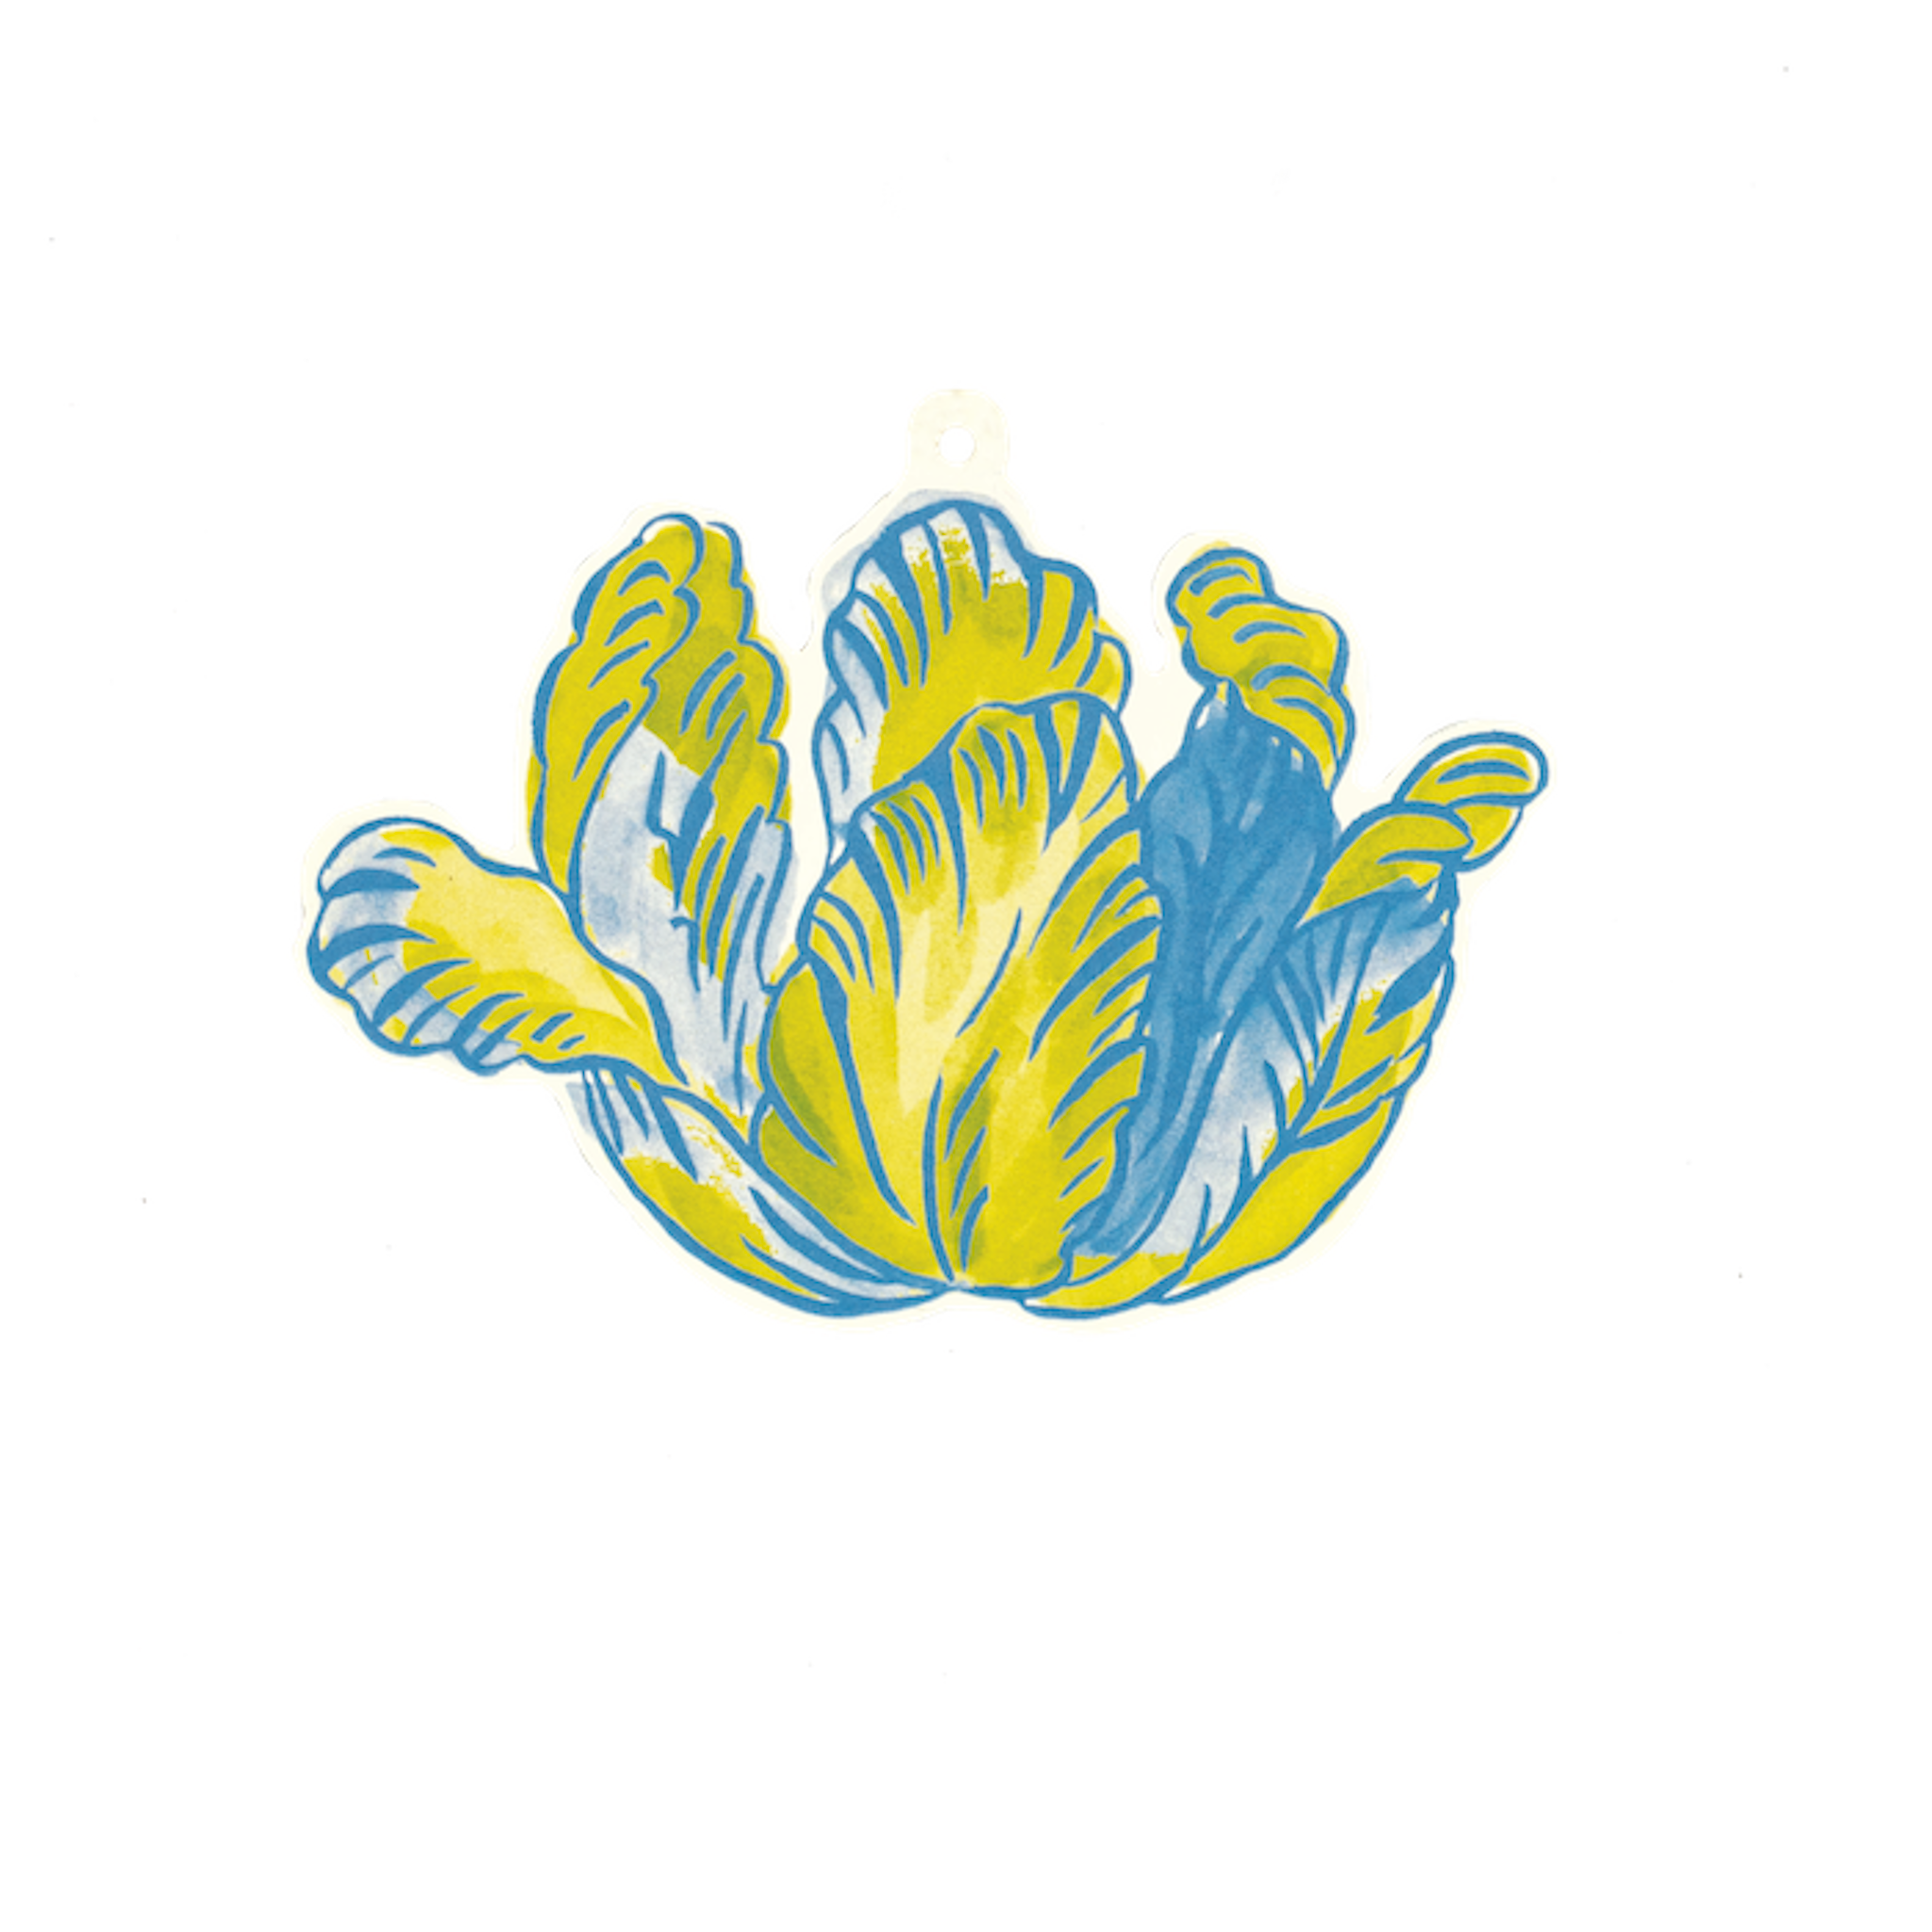 Illustration of a stylized, blue and yellow feathered design on a dark background, inspired by the Hester &amp; Cook Jardiniere Gift Tag collaboration.